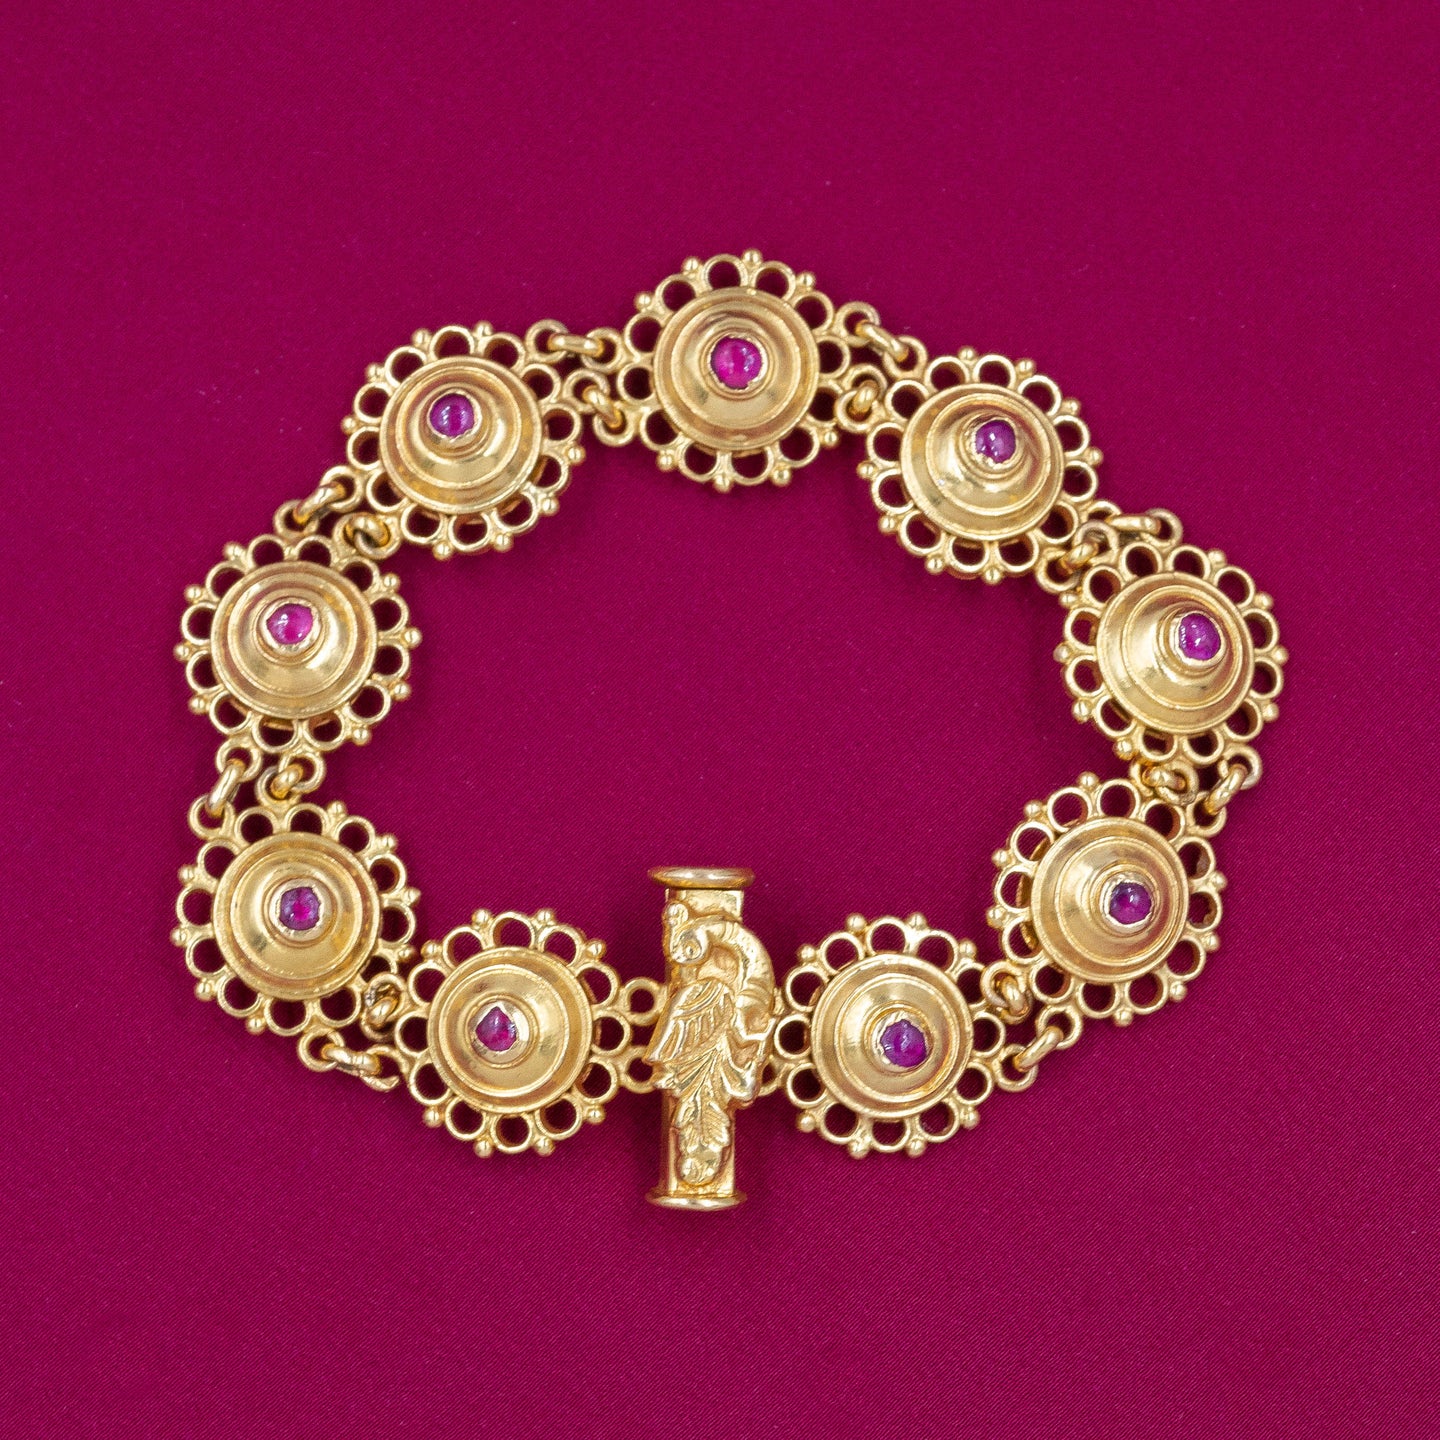 22k Ruby Bracelet with Peacock Clasp